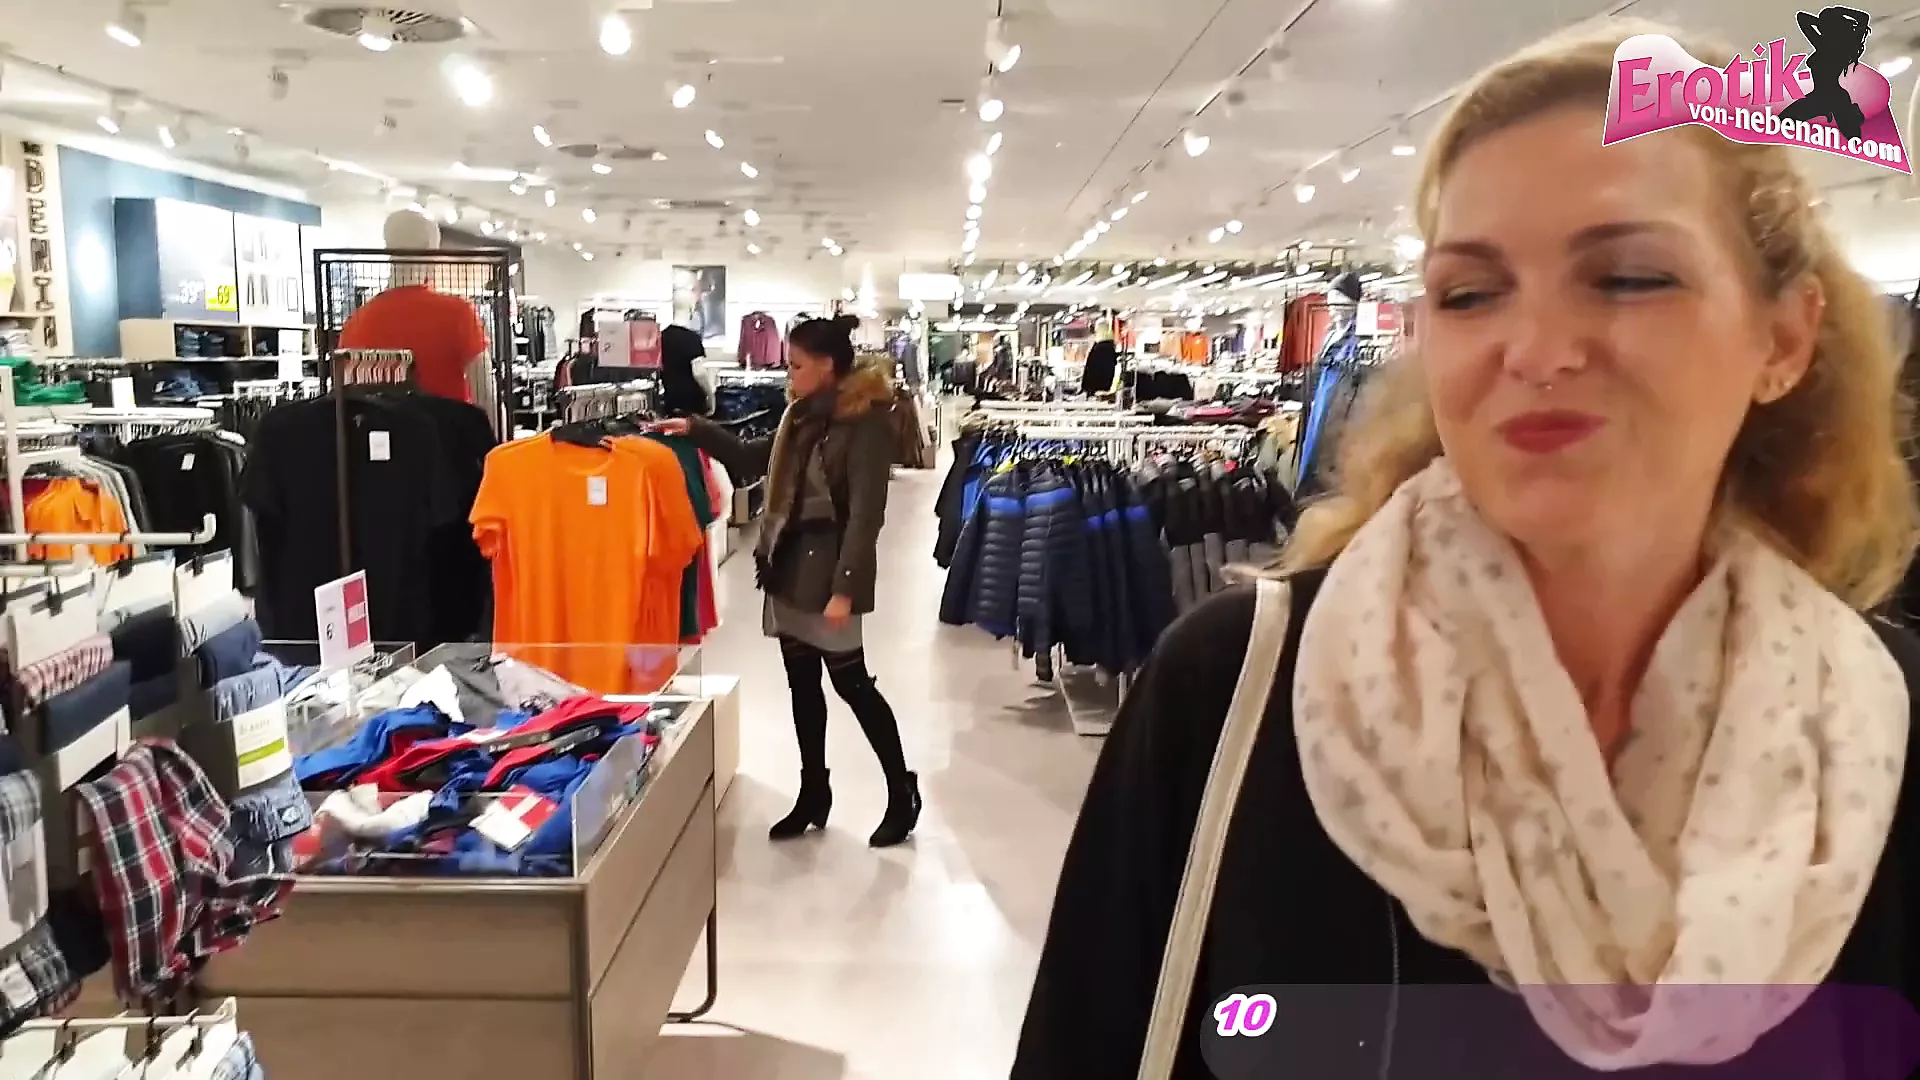 THREESOME CUM WALK IN SHOPPING CENTER AFTER Changing room image picture